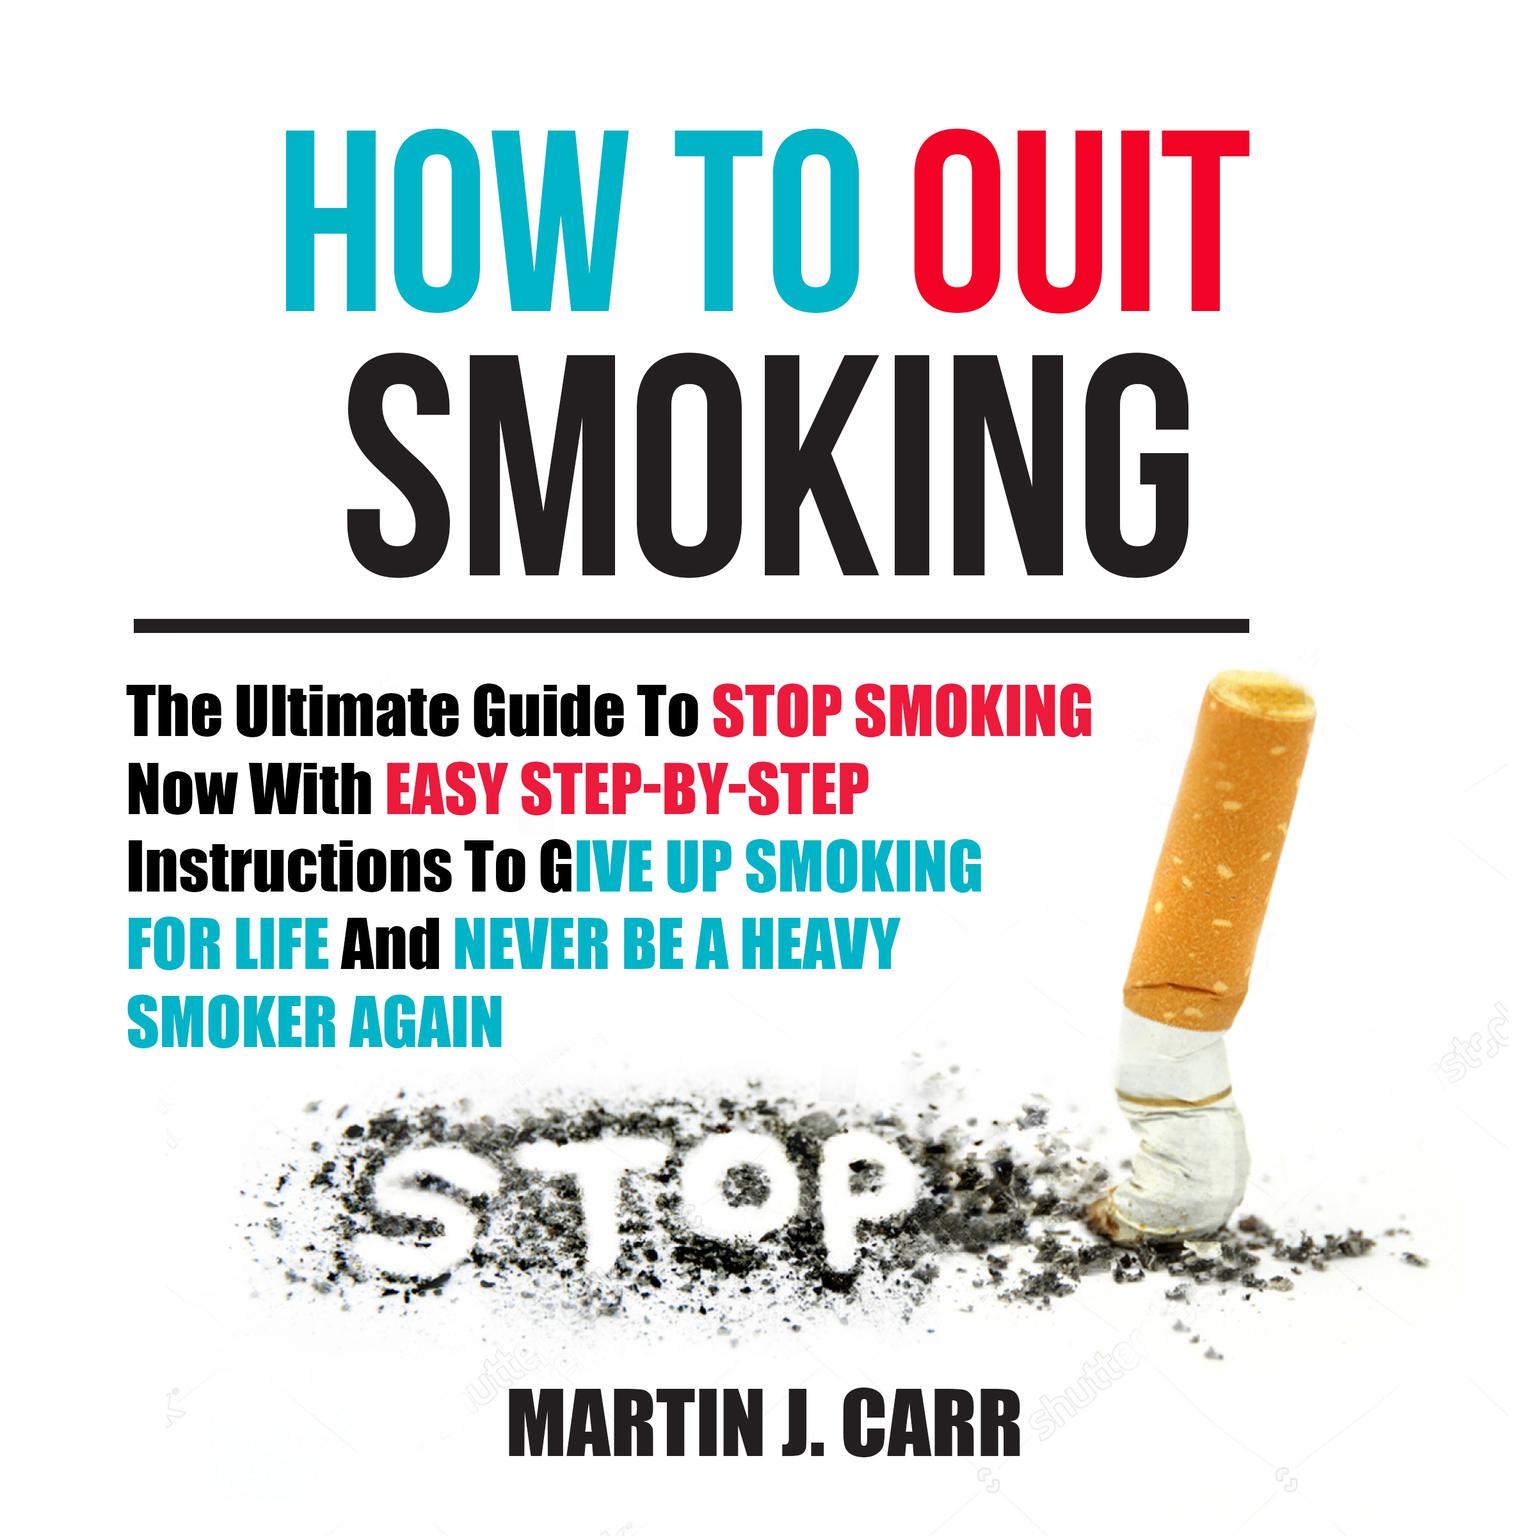 How to Quit Smoking: The Ultimate Guide to Stop Smoking Now with Easy Step-by-Step Instructions to Give Up Smoking for Life and Never Be a Heavy Smoker Again Audiobook, by Martin Zucker